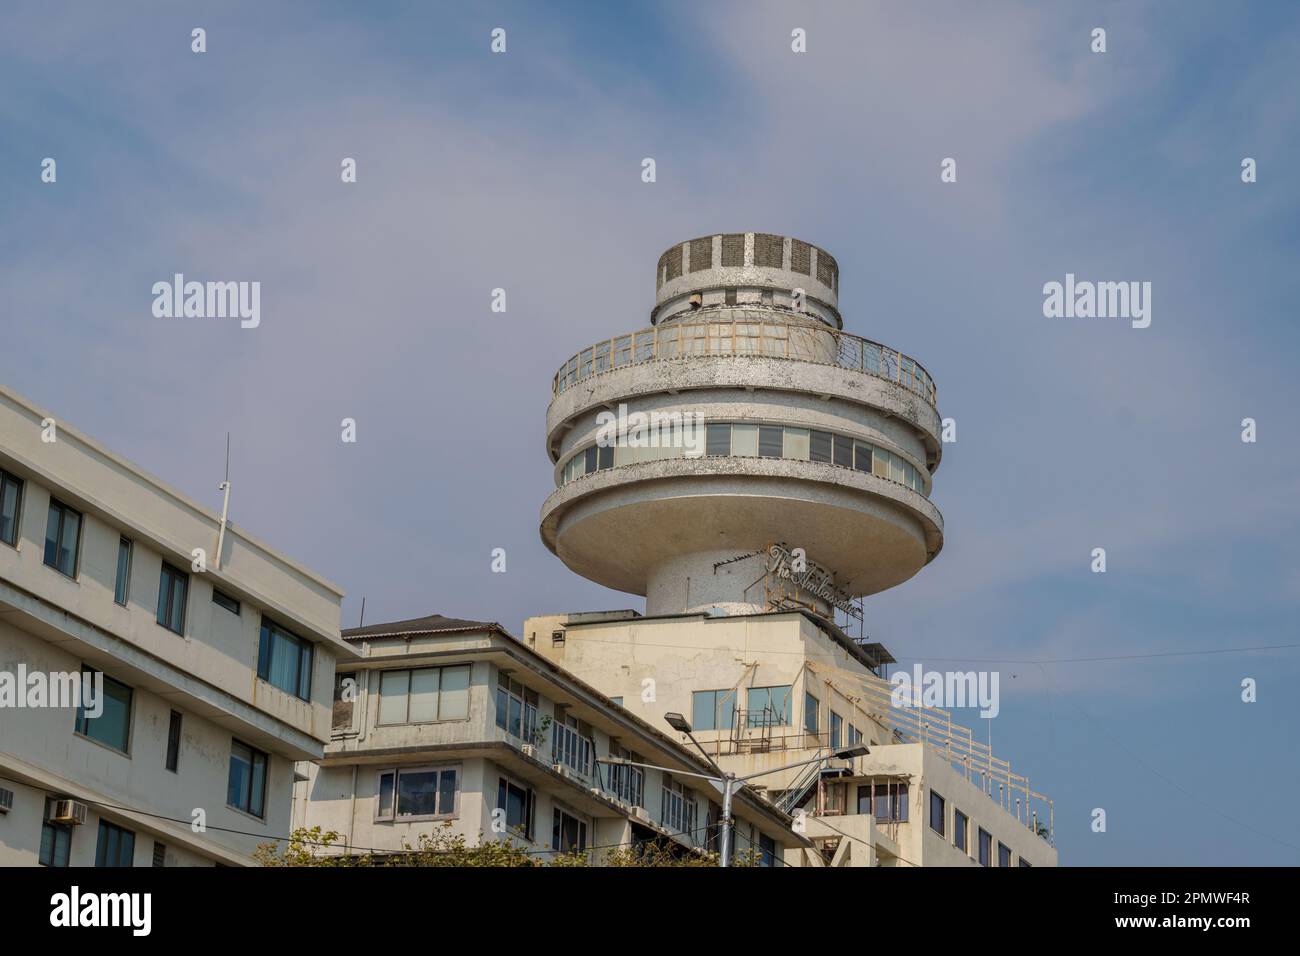 The exterior of the iconic Ambassador Hotel Building at Nariman Point in Mumbai, India Stock Photo